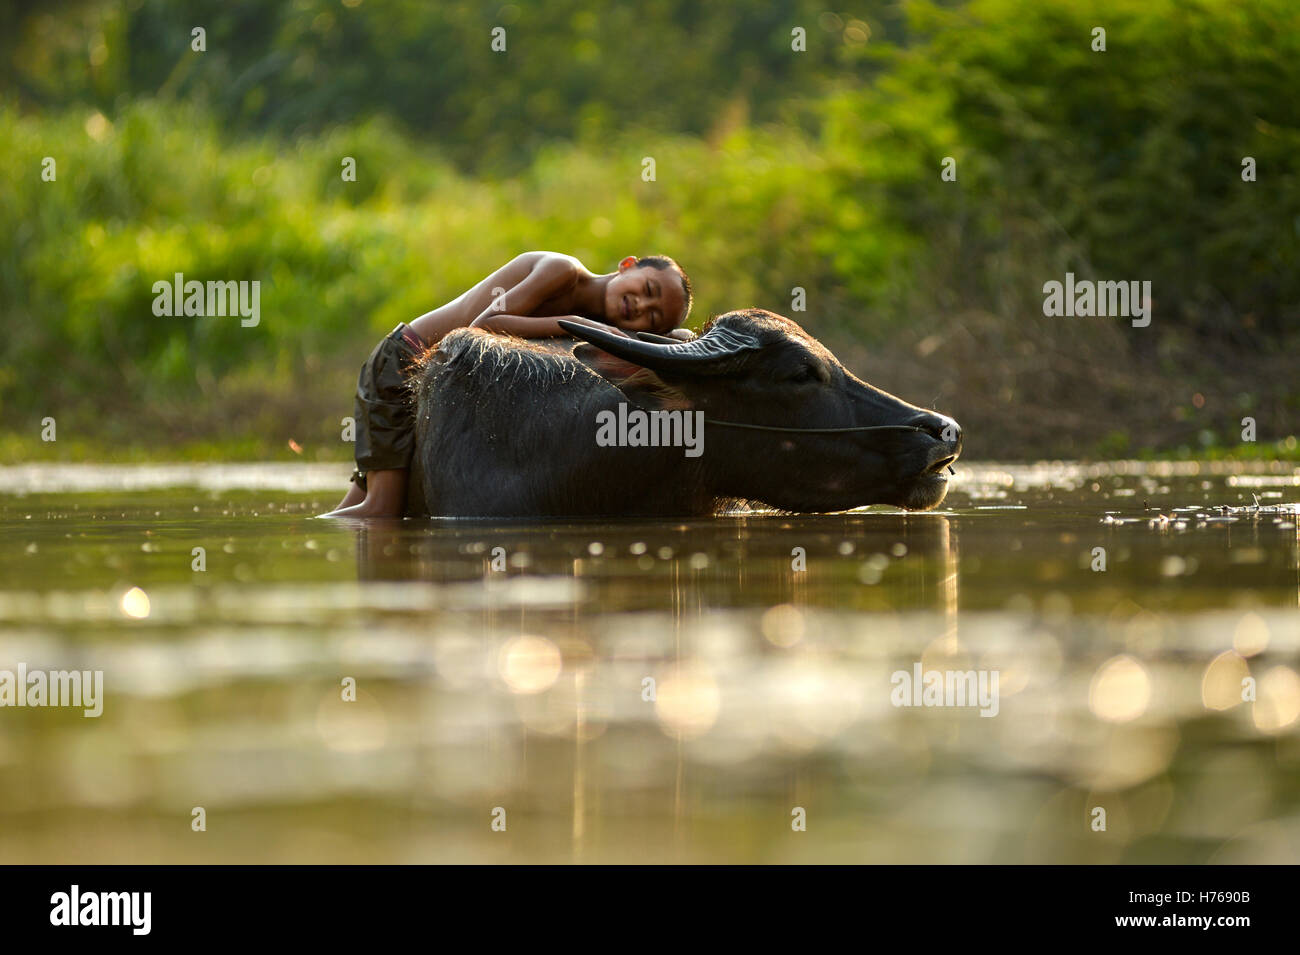 Boy playing with a buffalo, Thailand Stock Photo